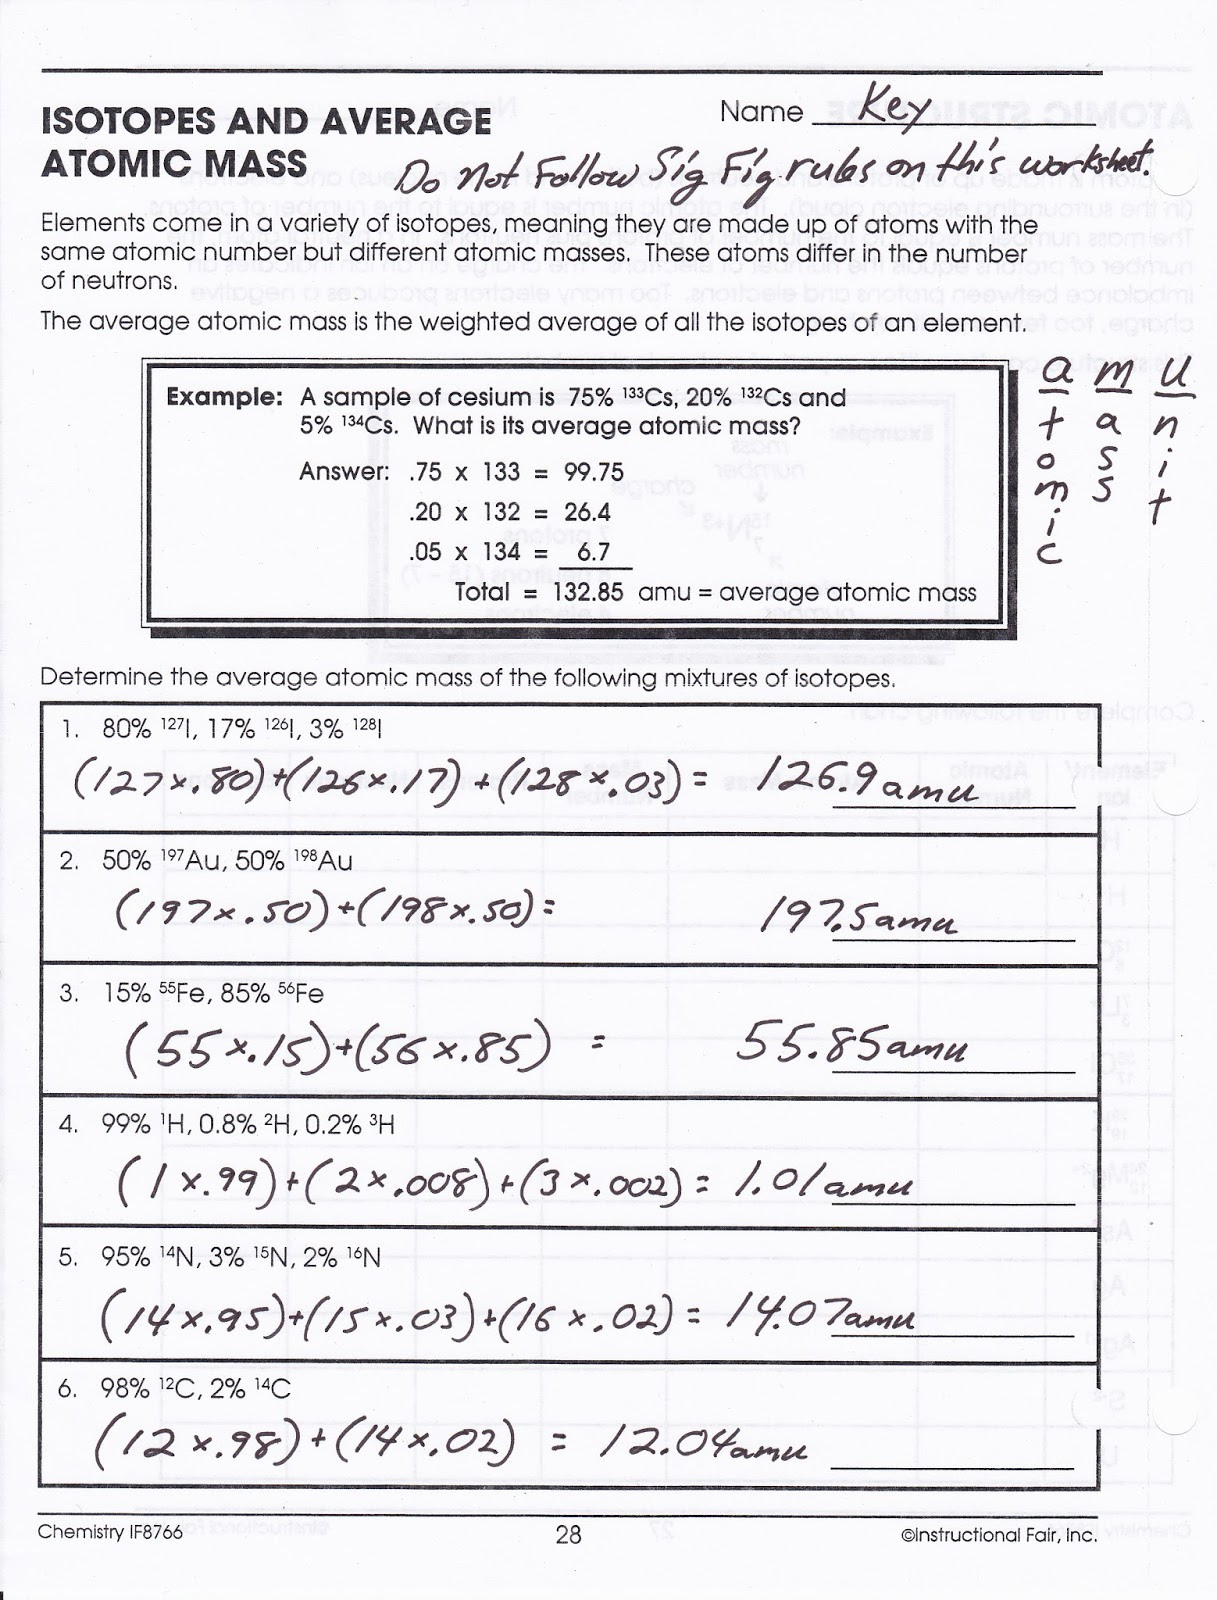 Isotopes And Average Atomic Mass Worksheet Answers Db excel